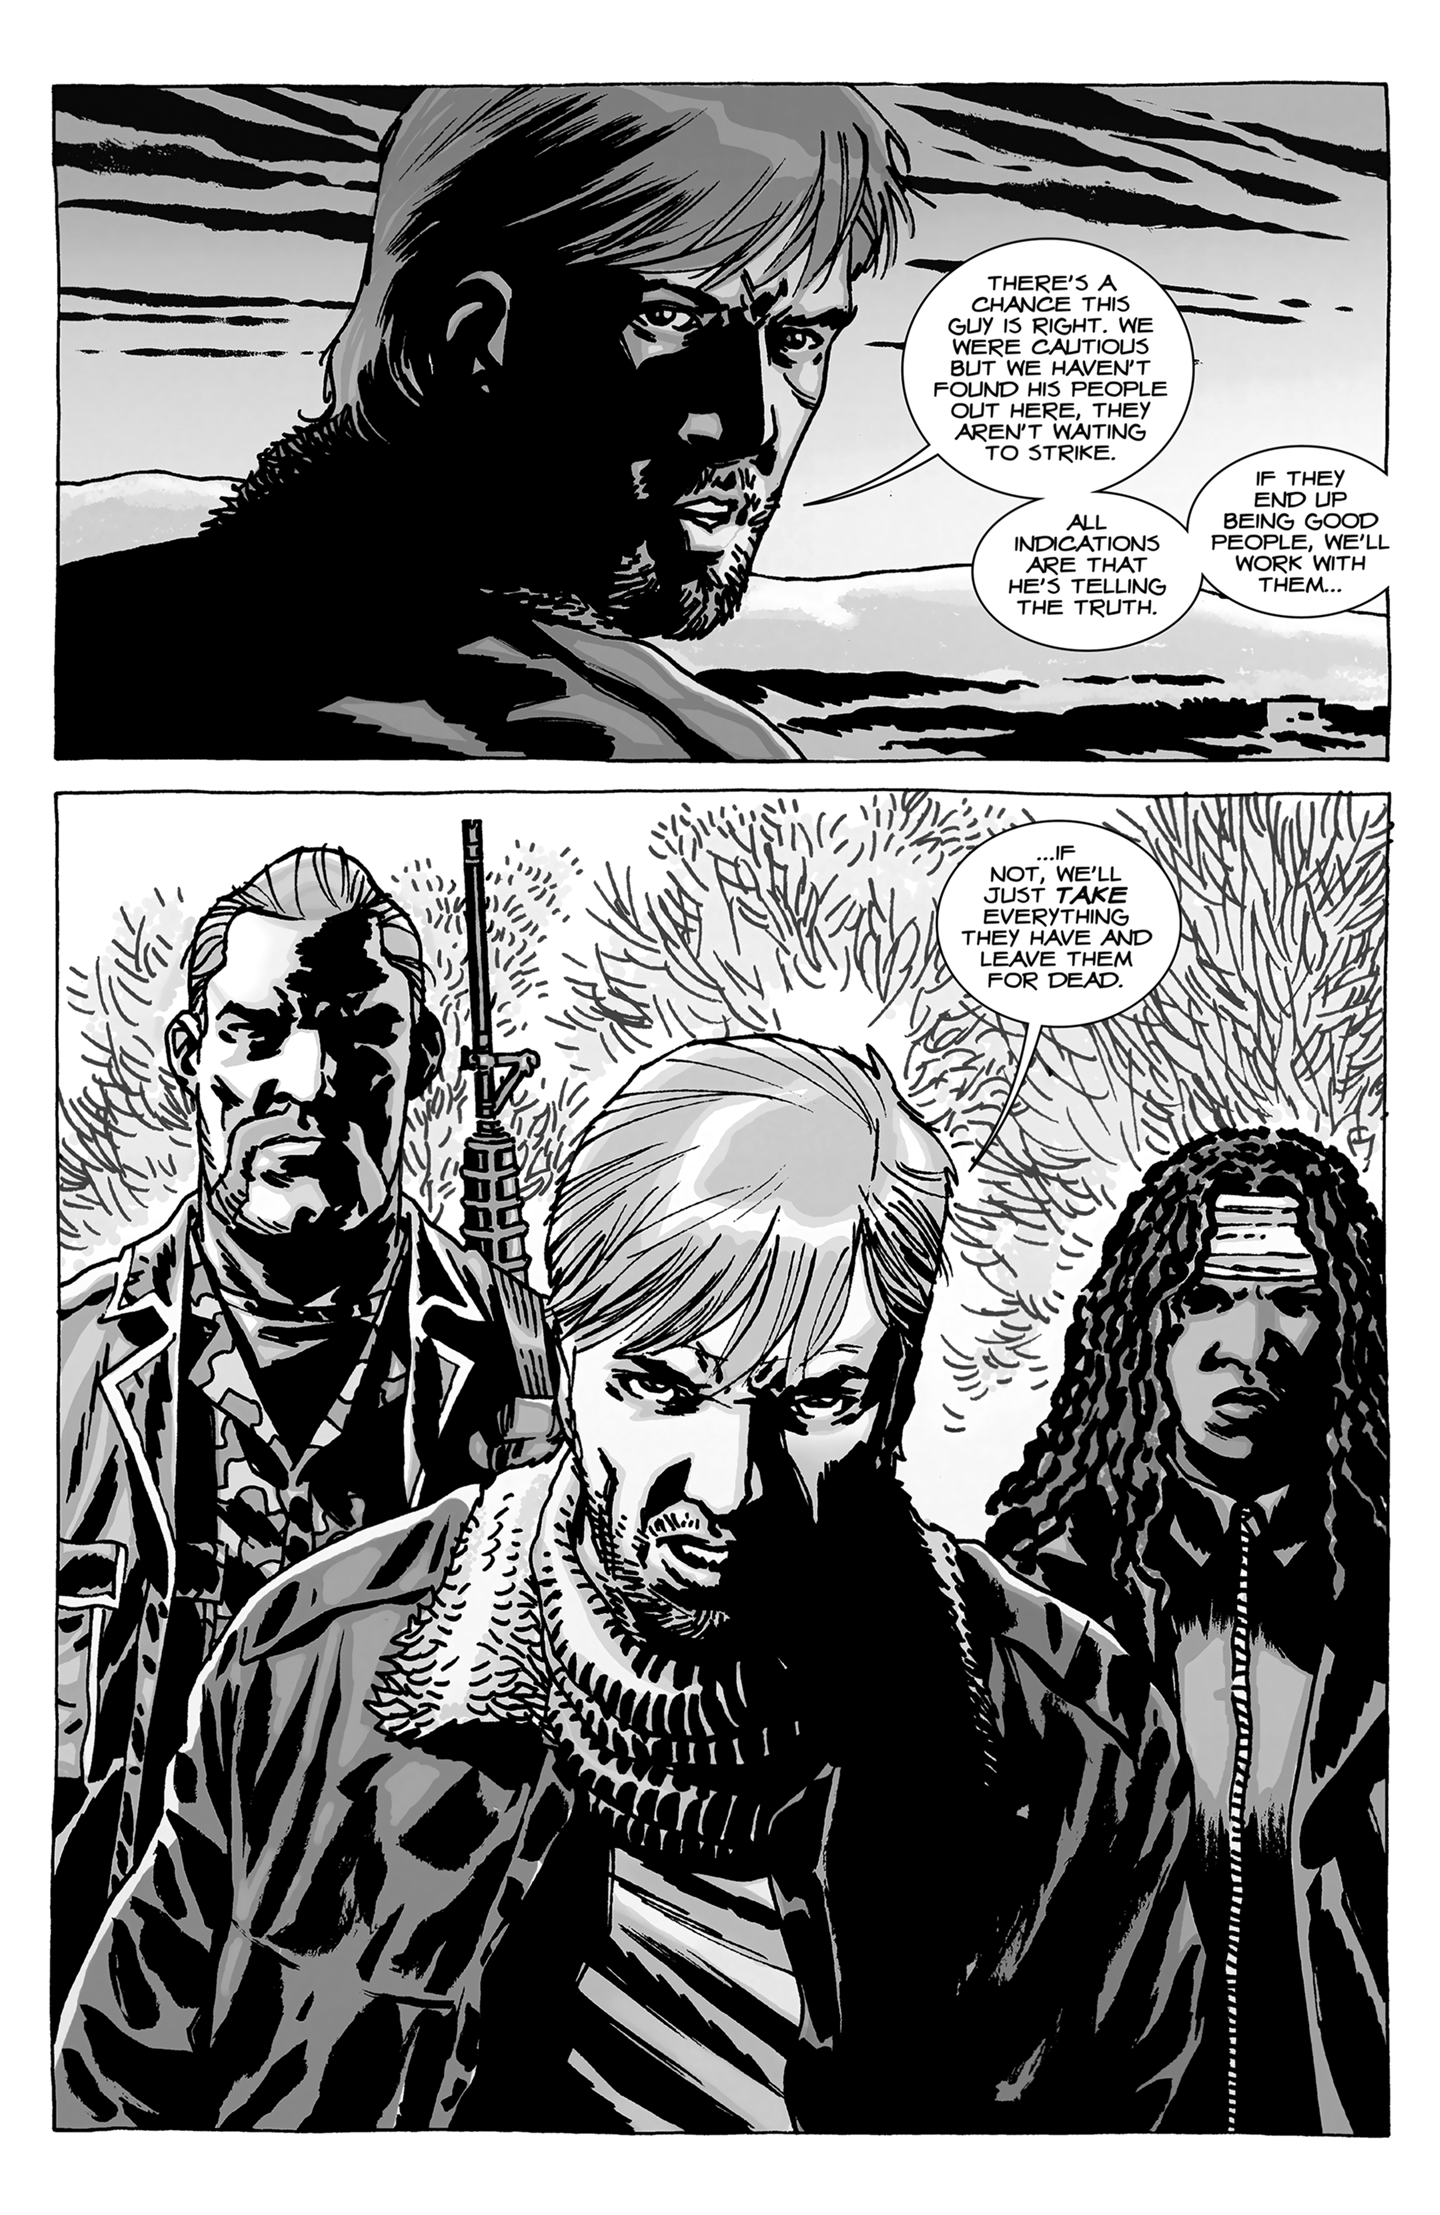 The Walking Dead 93 - A Larger World, Part One